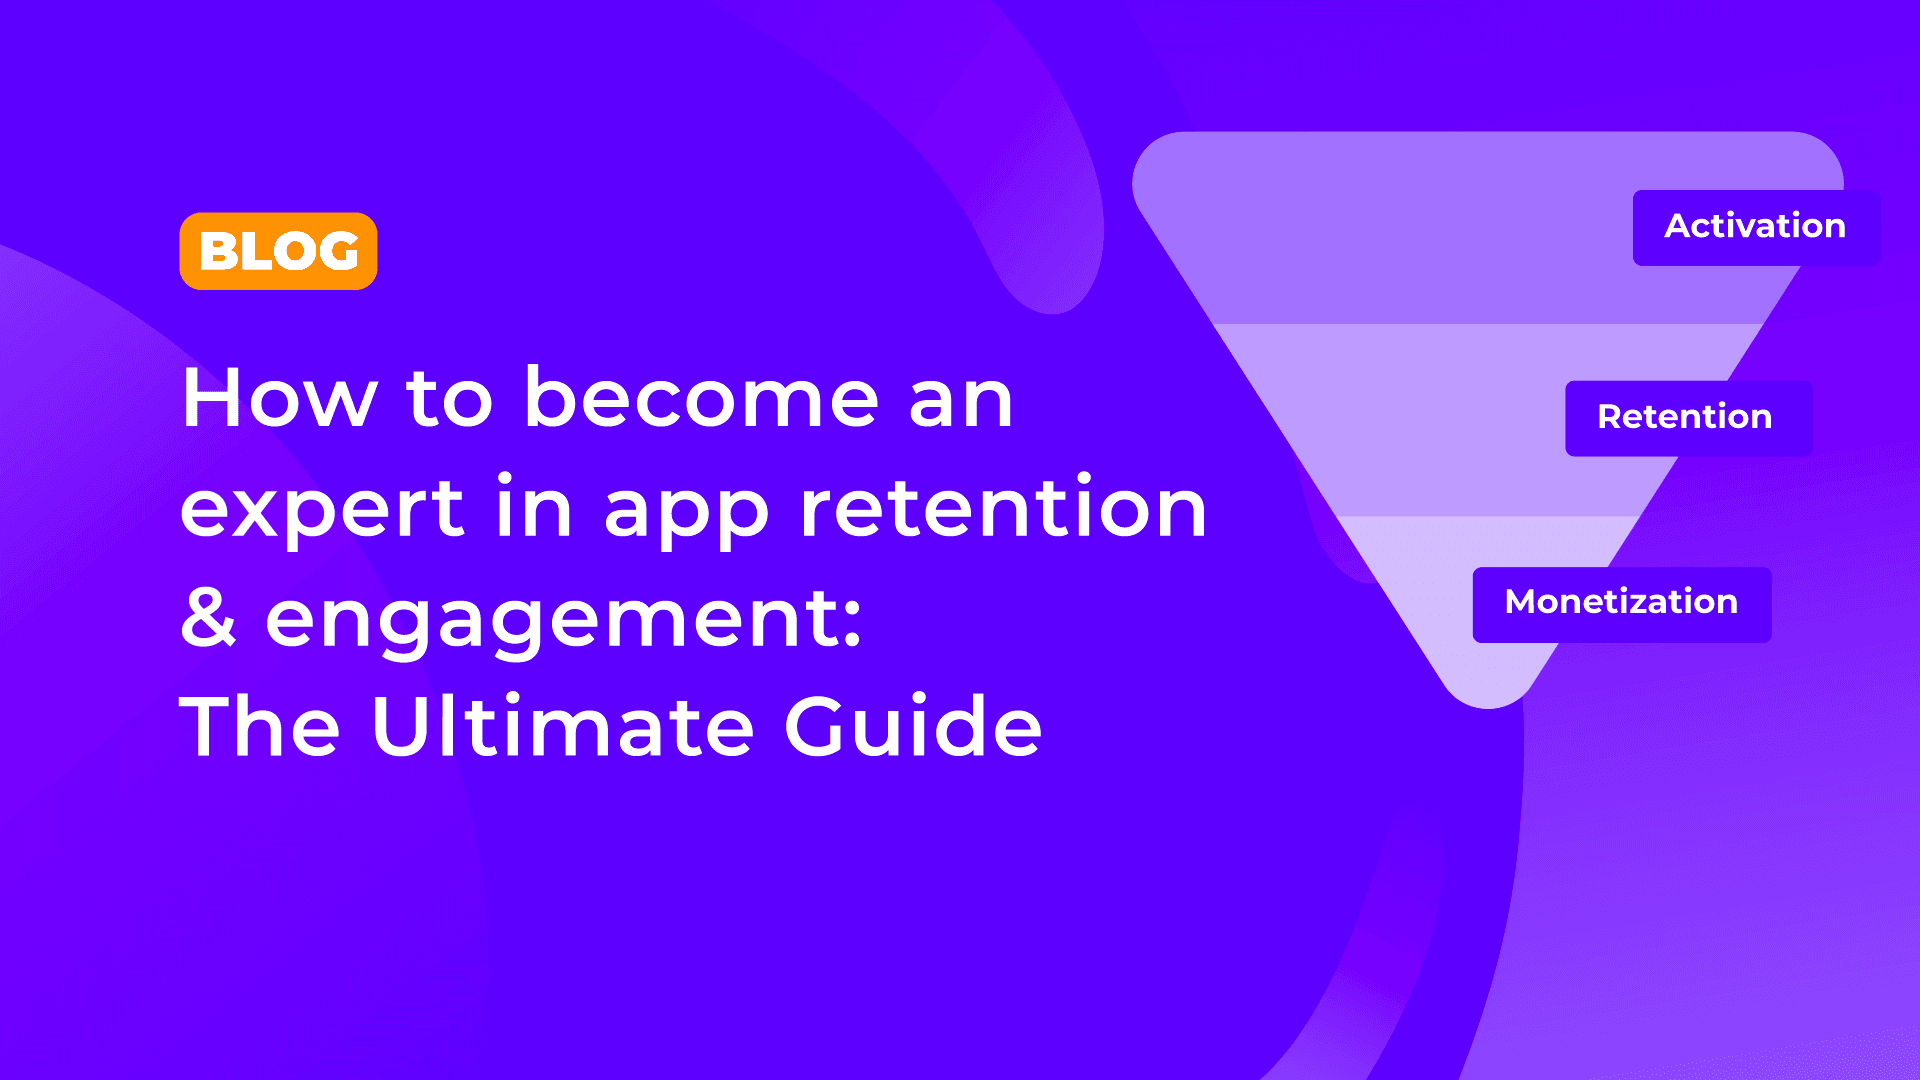 The ultimate guide on how to become an expert in app retention & engagement